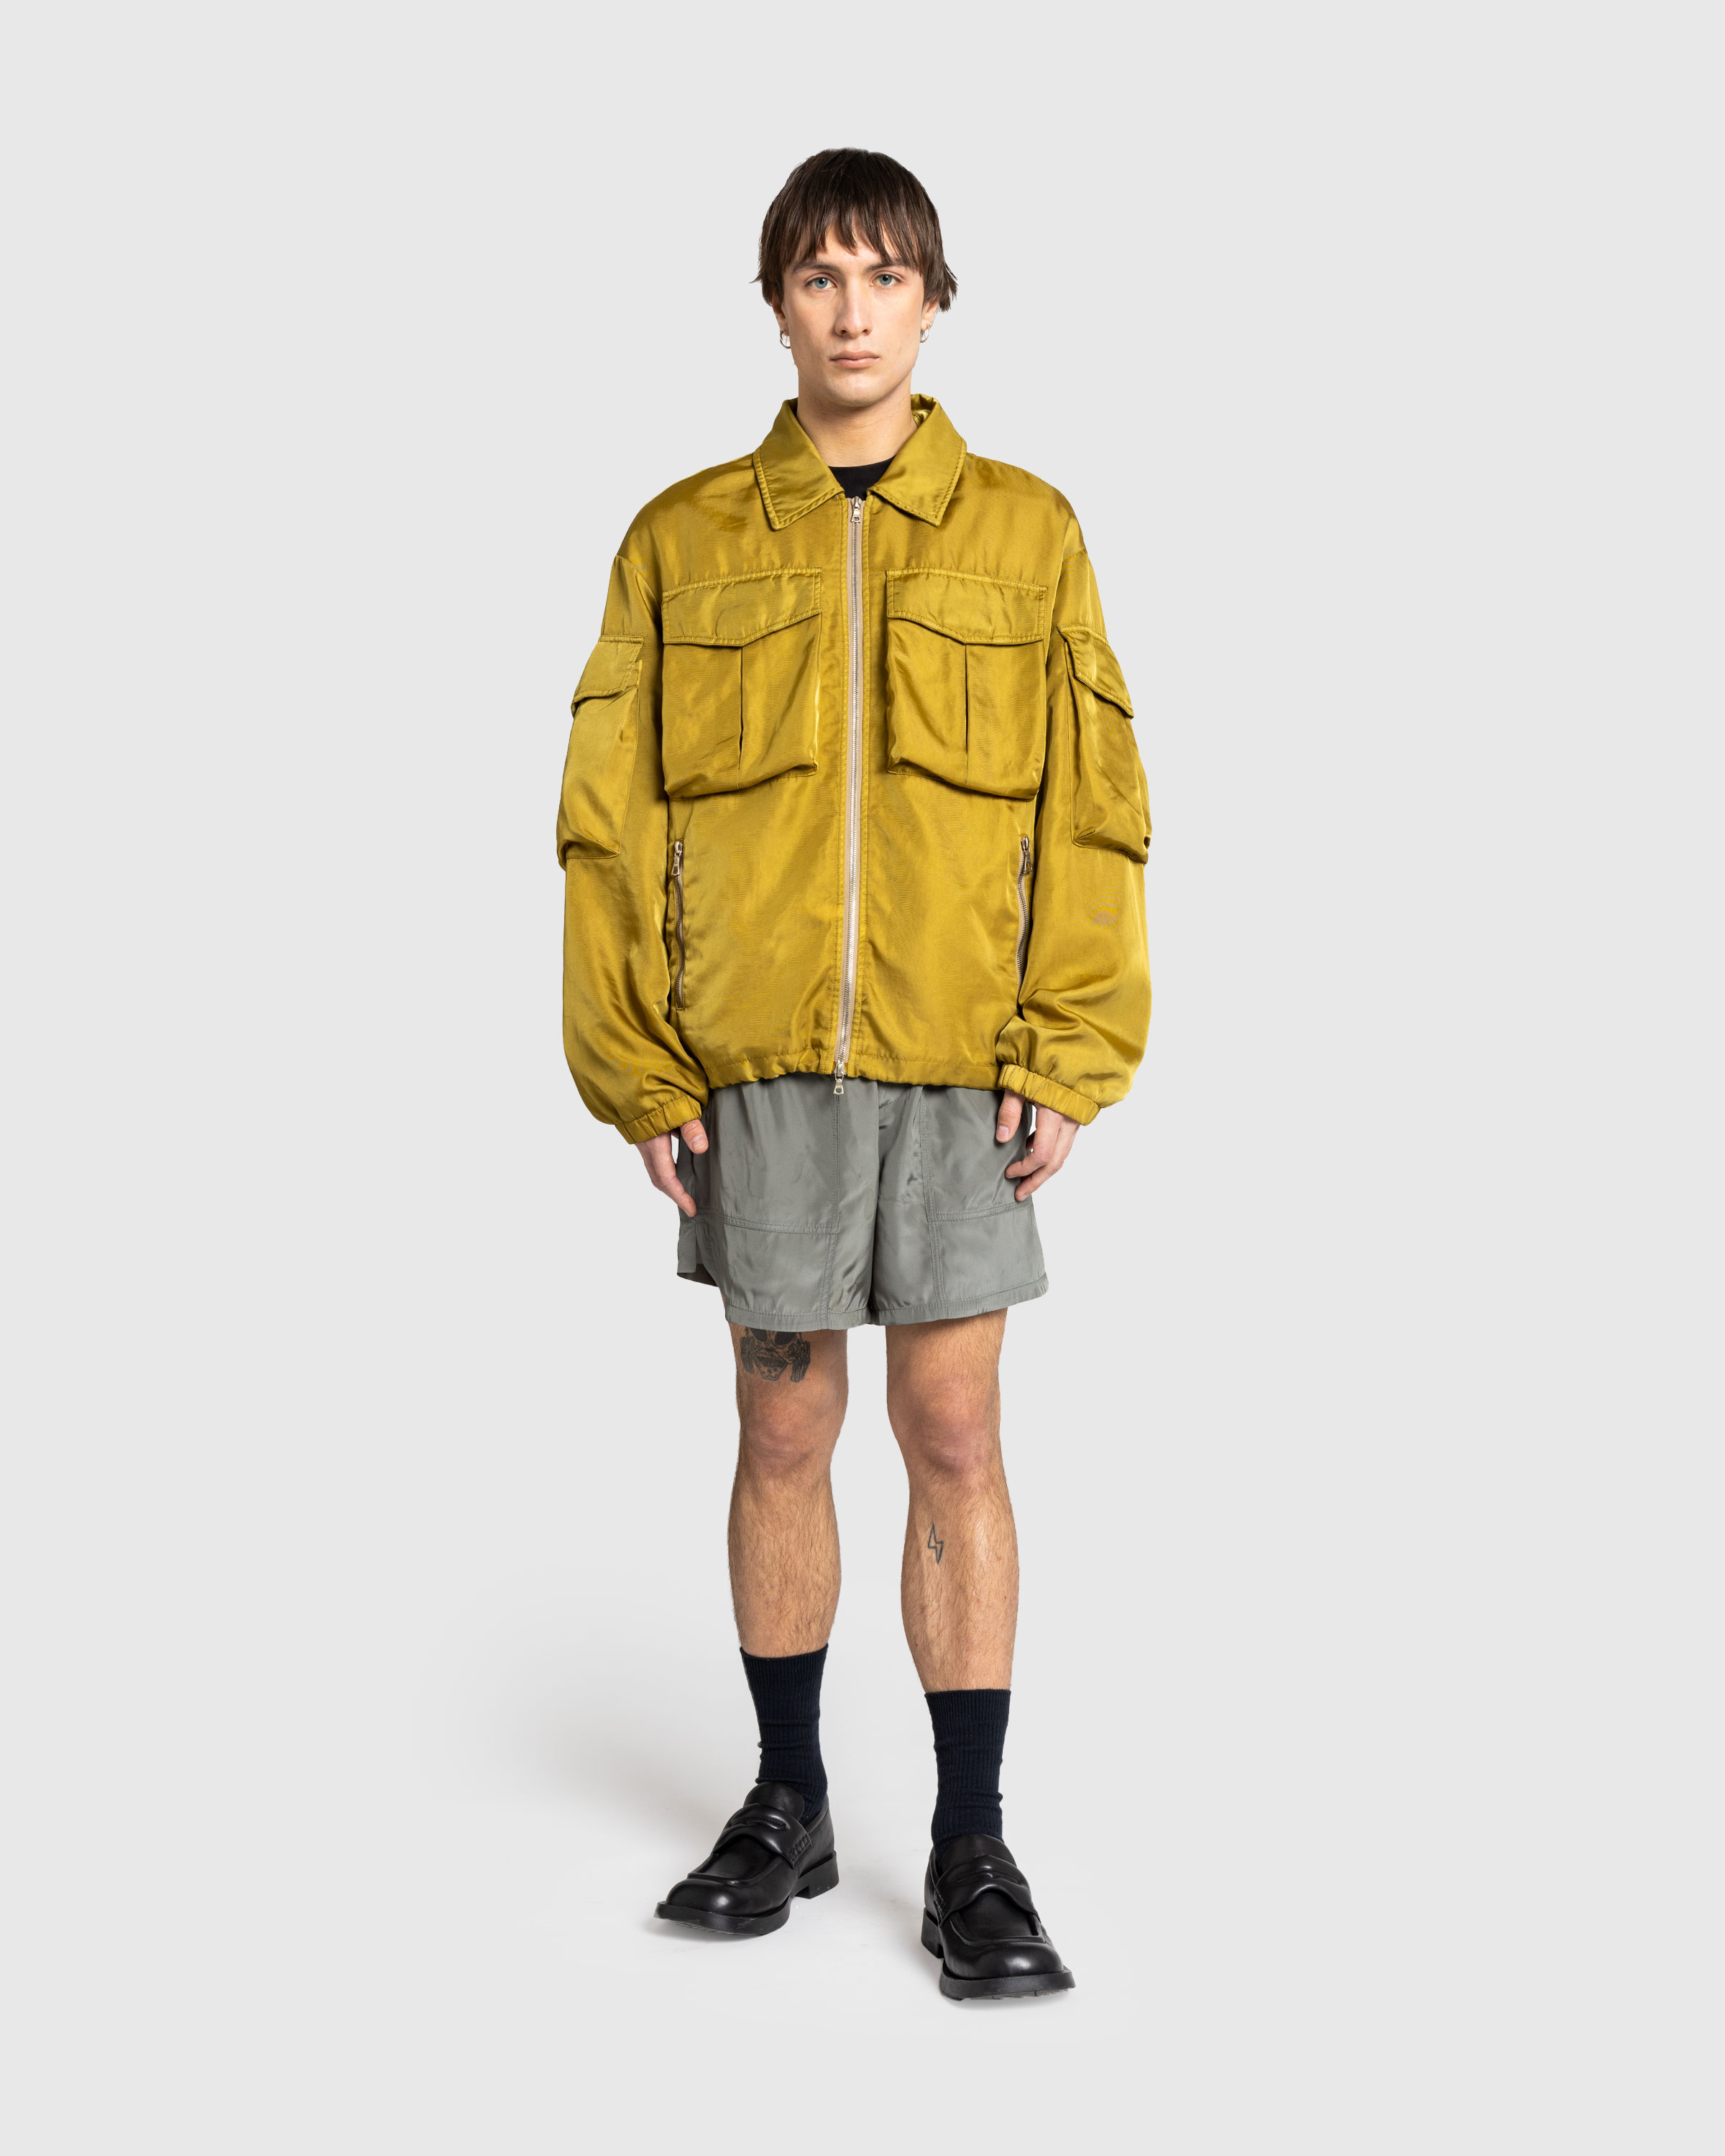 Dries van Noten – Overdyed Jacket Olive - Outerwear - Green - Image 3